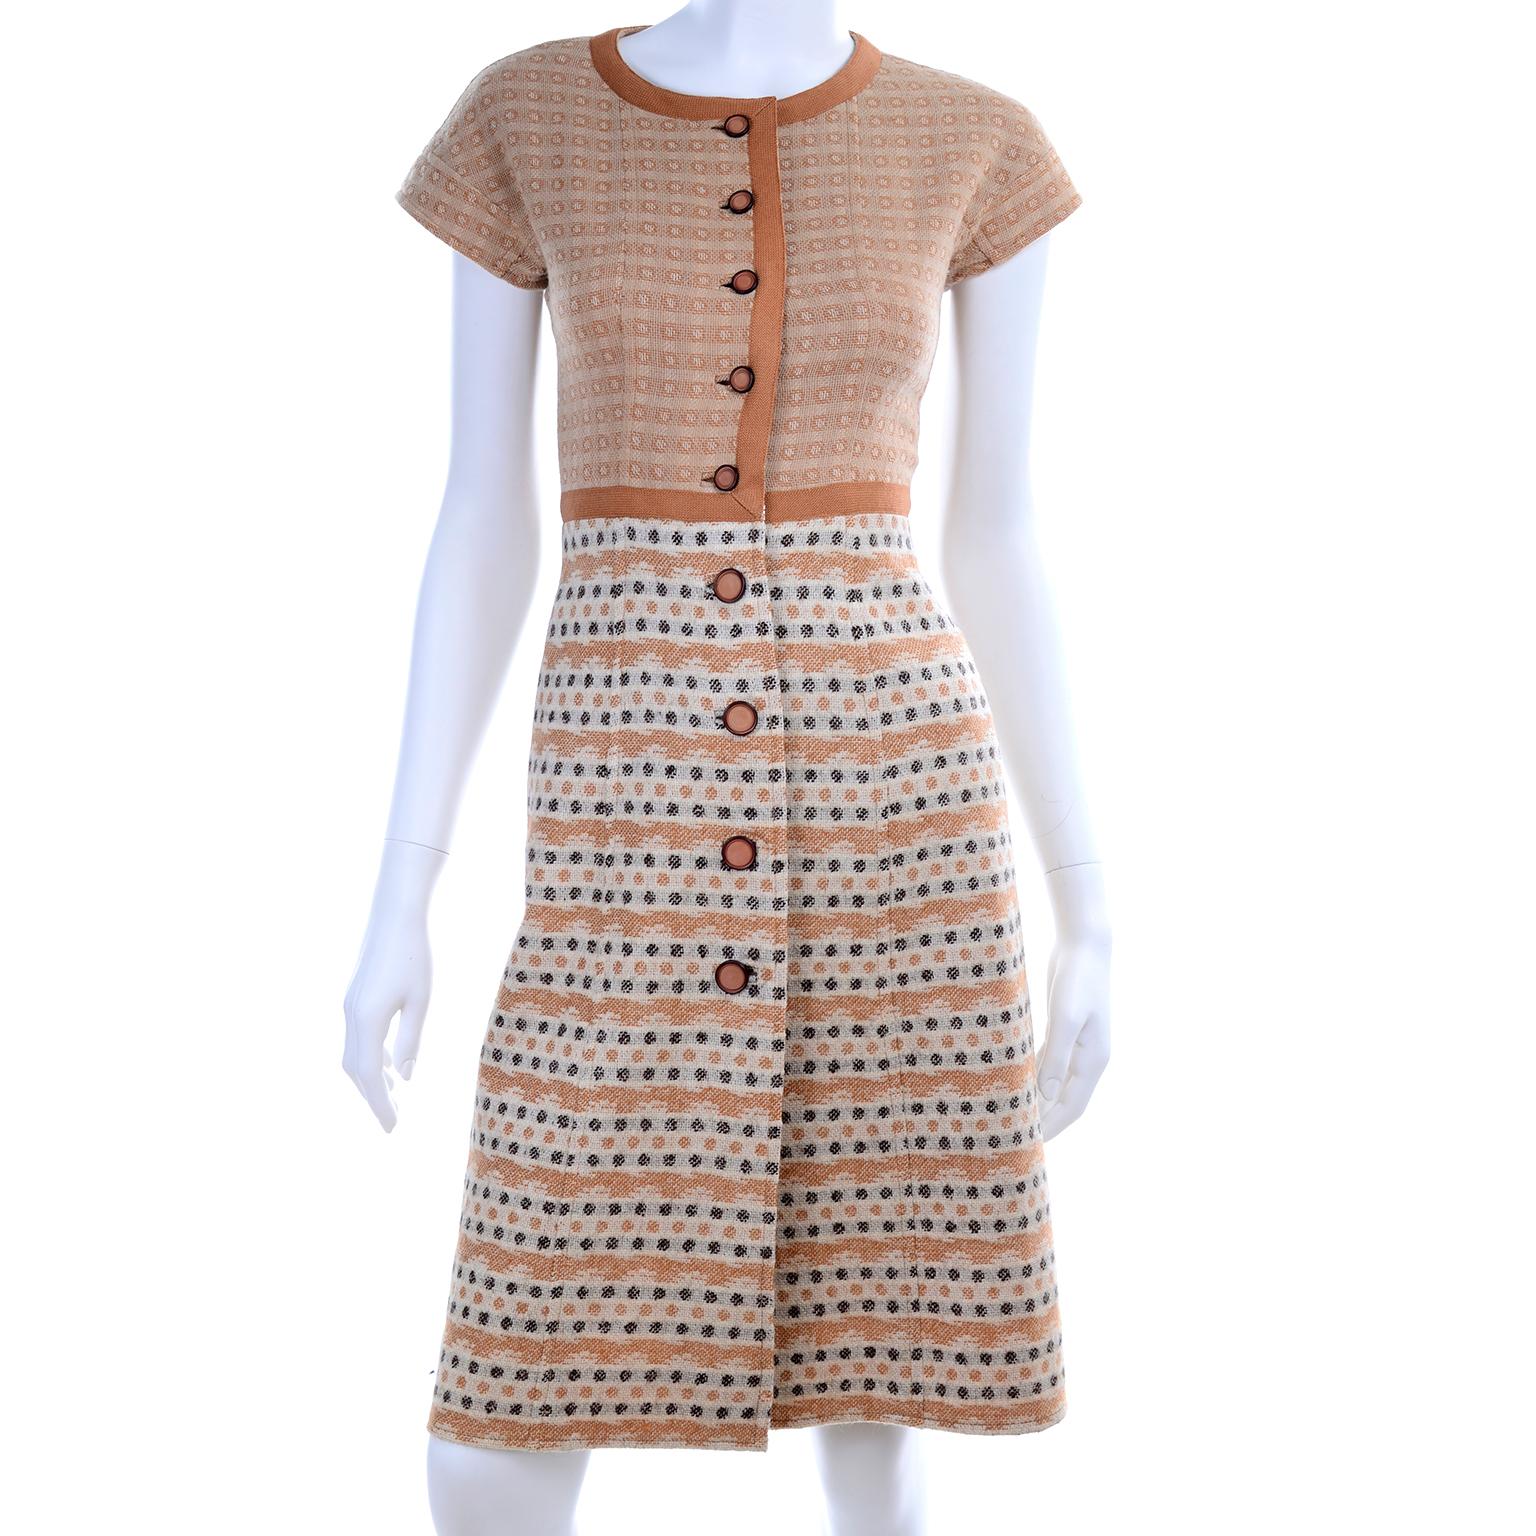 This is a rare wool knit vintage dress and jacket suit from Emanuel Ungaro Parallele from the 1970's.  The outfit includes a short sleeve dress that buttons down the center front and a jacket with pockets and a fabric belt.  We love the orange and